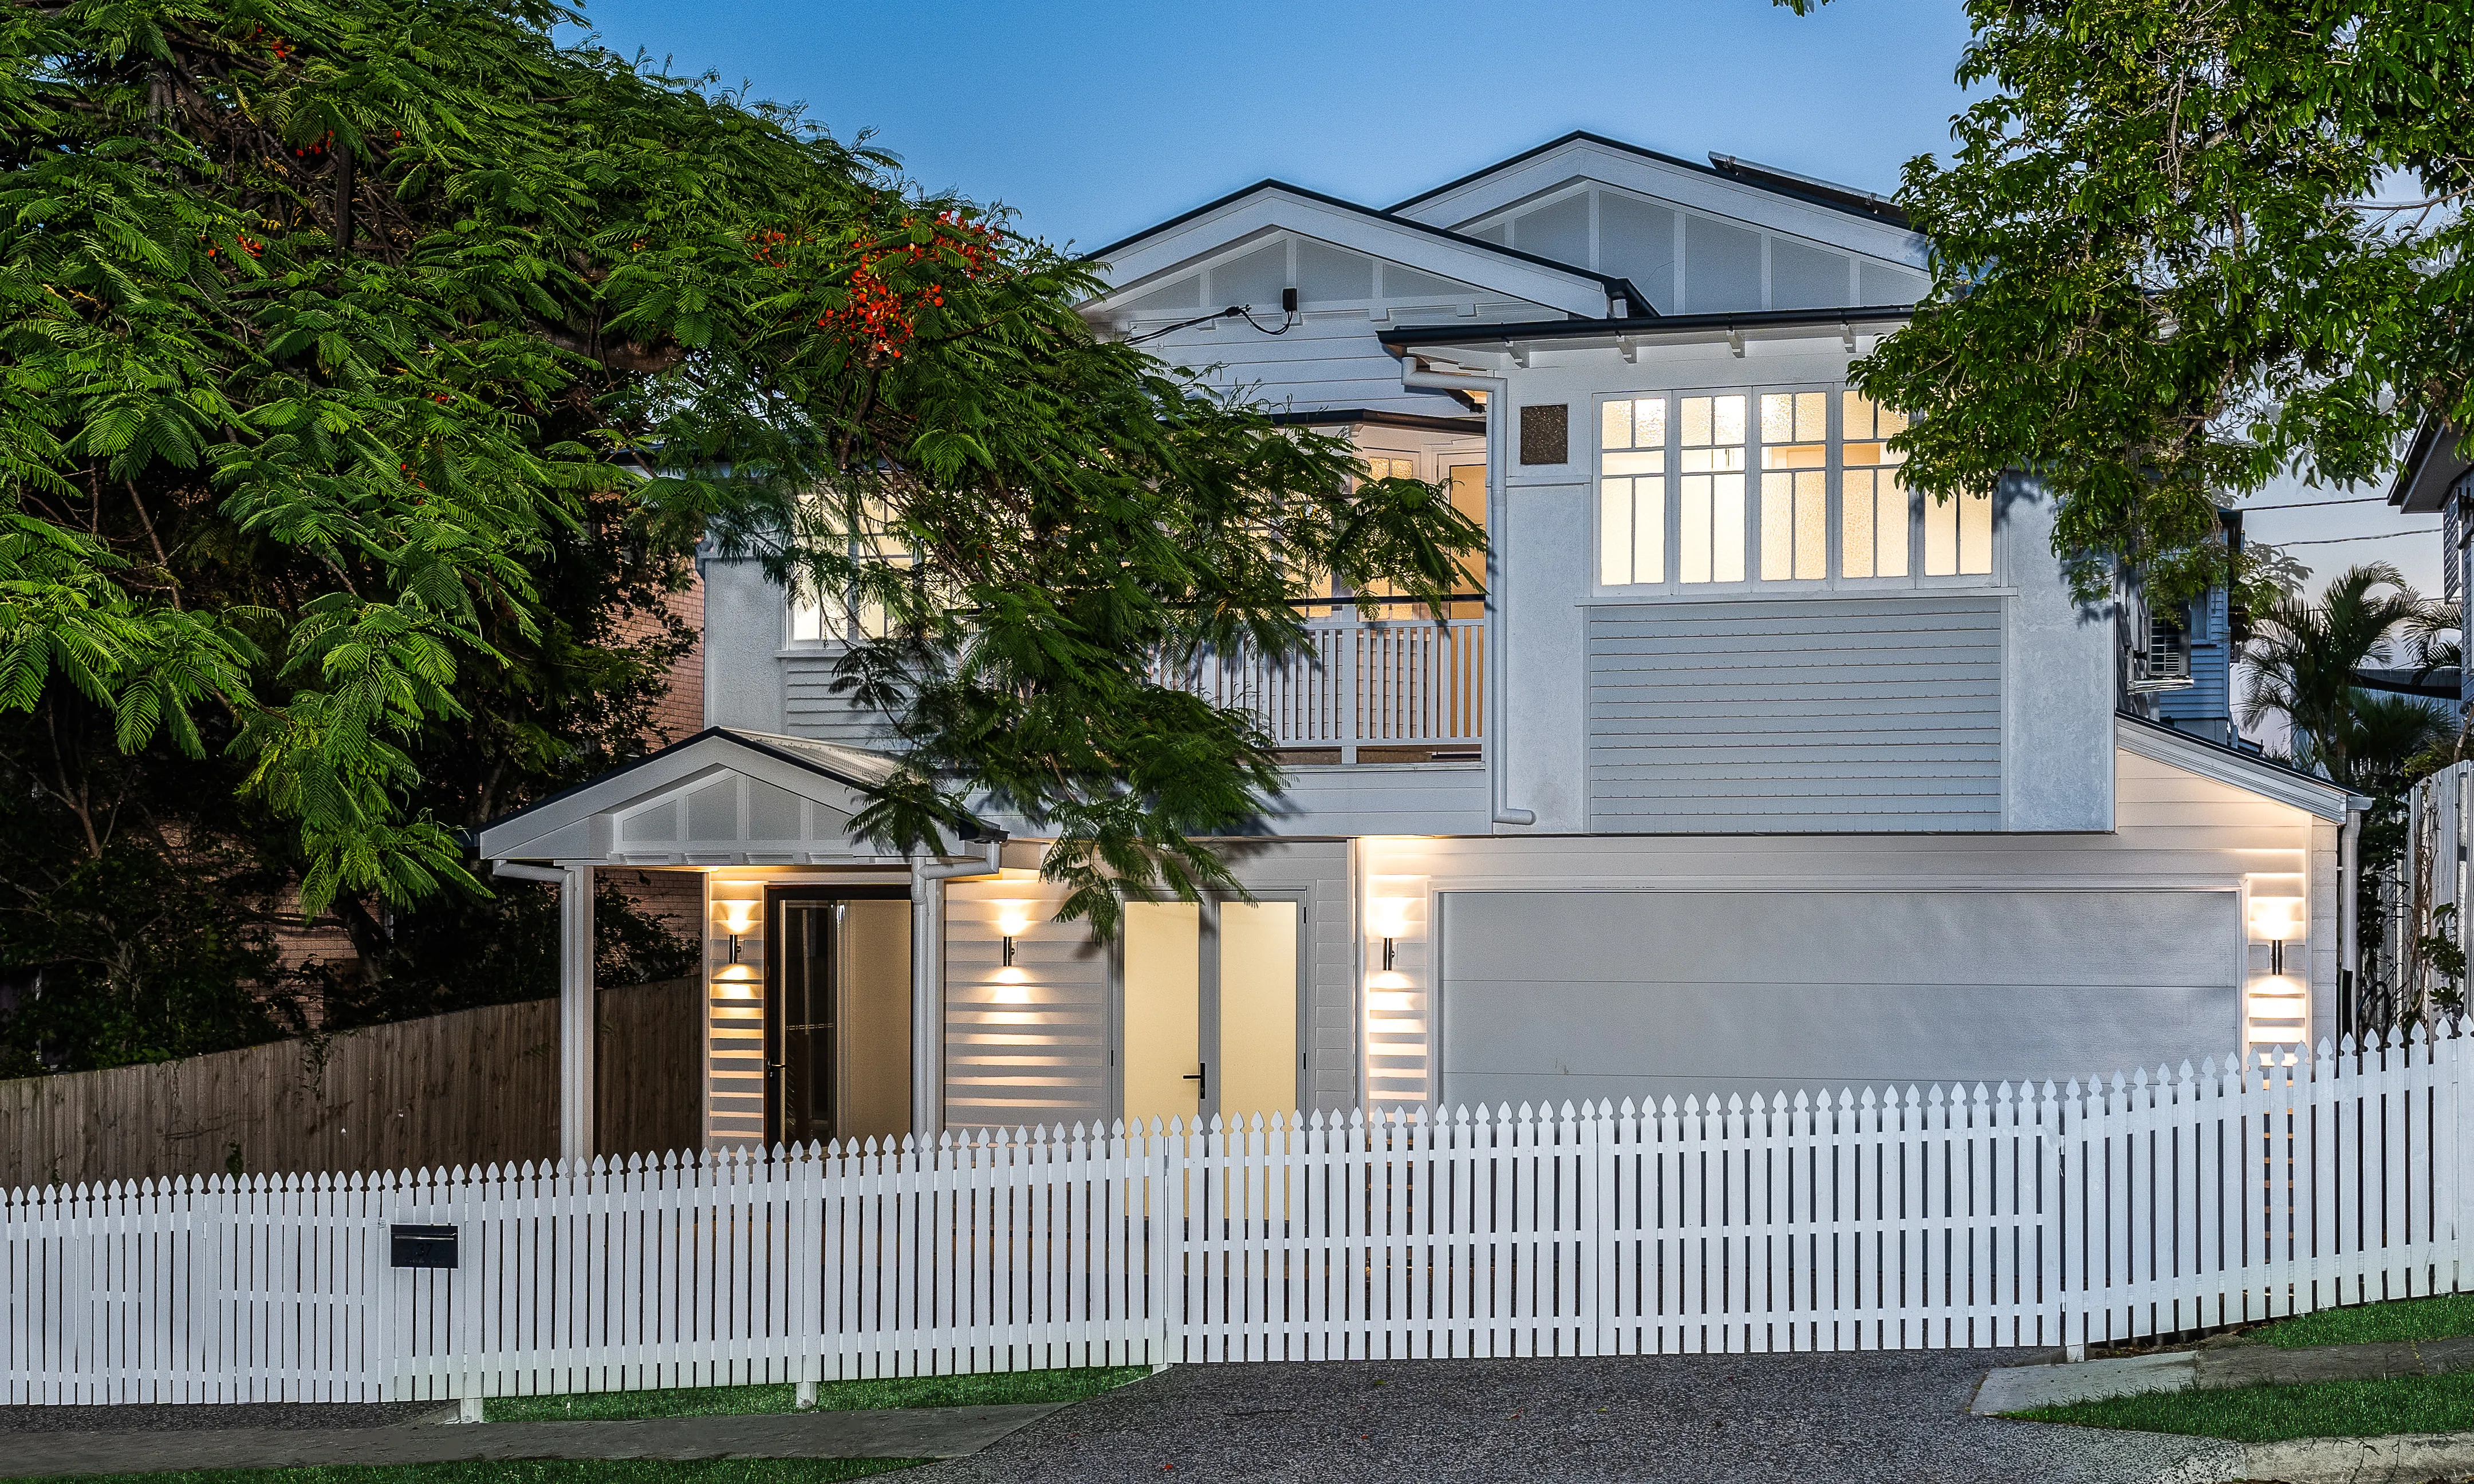 white and grey Queenslander house-traditional renovation-picket fence